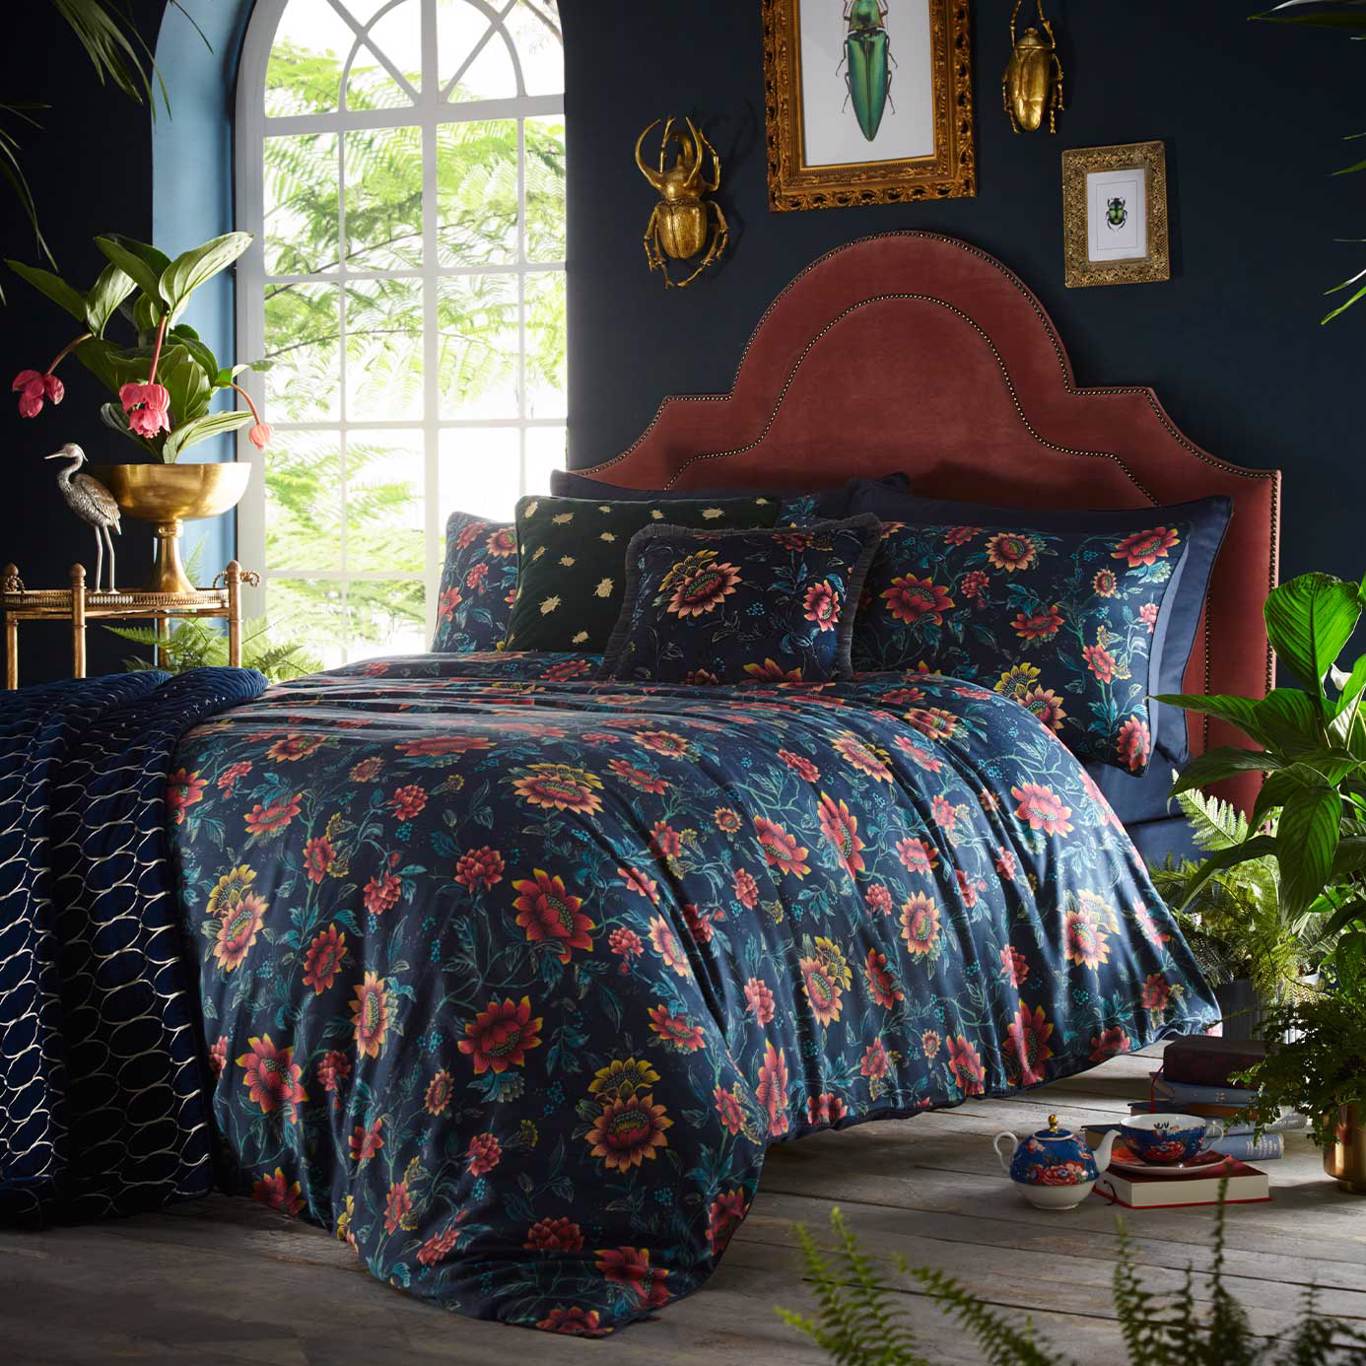 Tonquin Double Duvet Set Bedding - Midnight - by Wedgwood by Clarke & Clarke